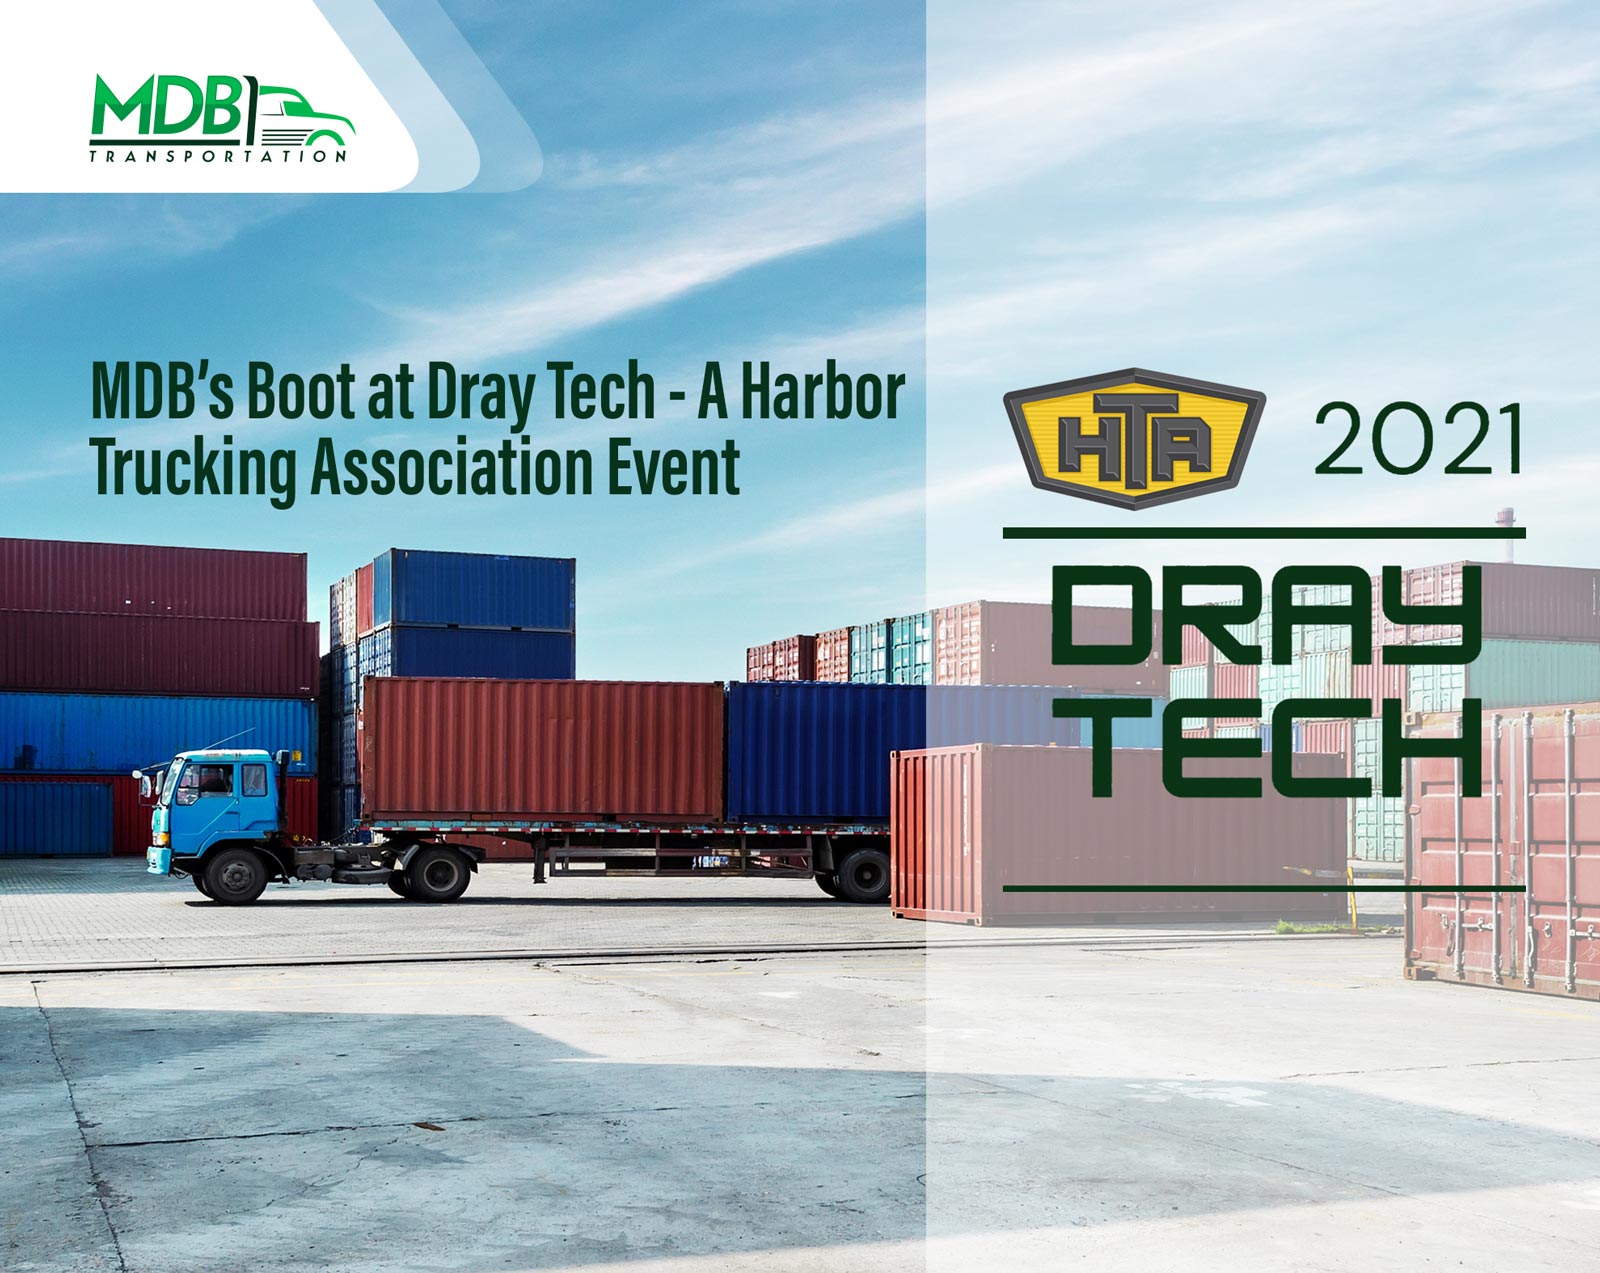 MDB’s Boot at Dray Tech – A Harbor Trucking Association Event